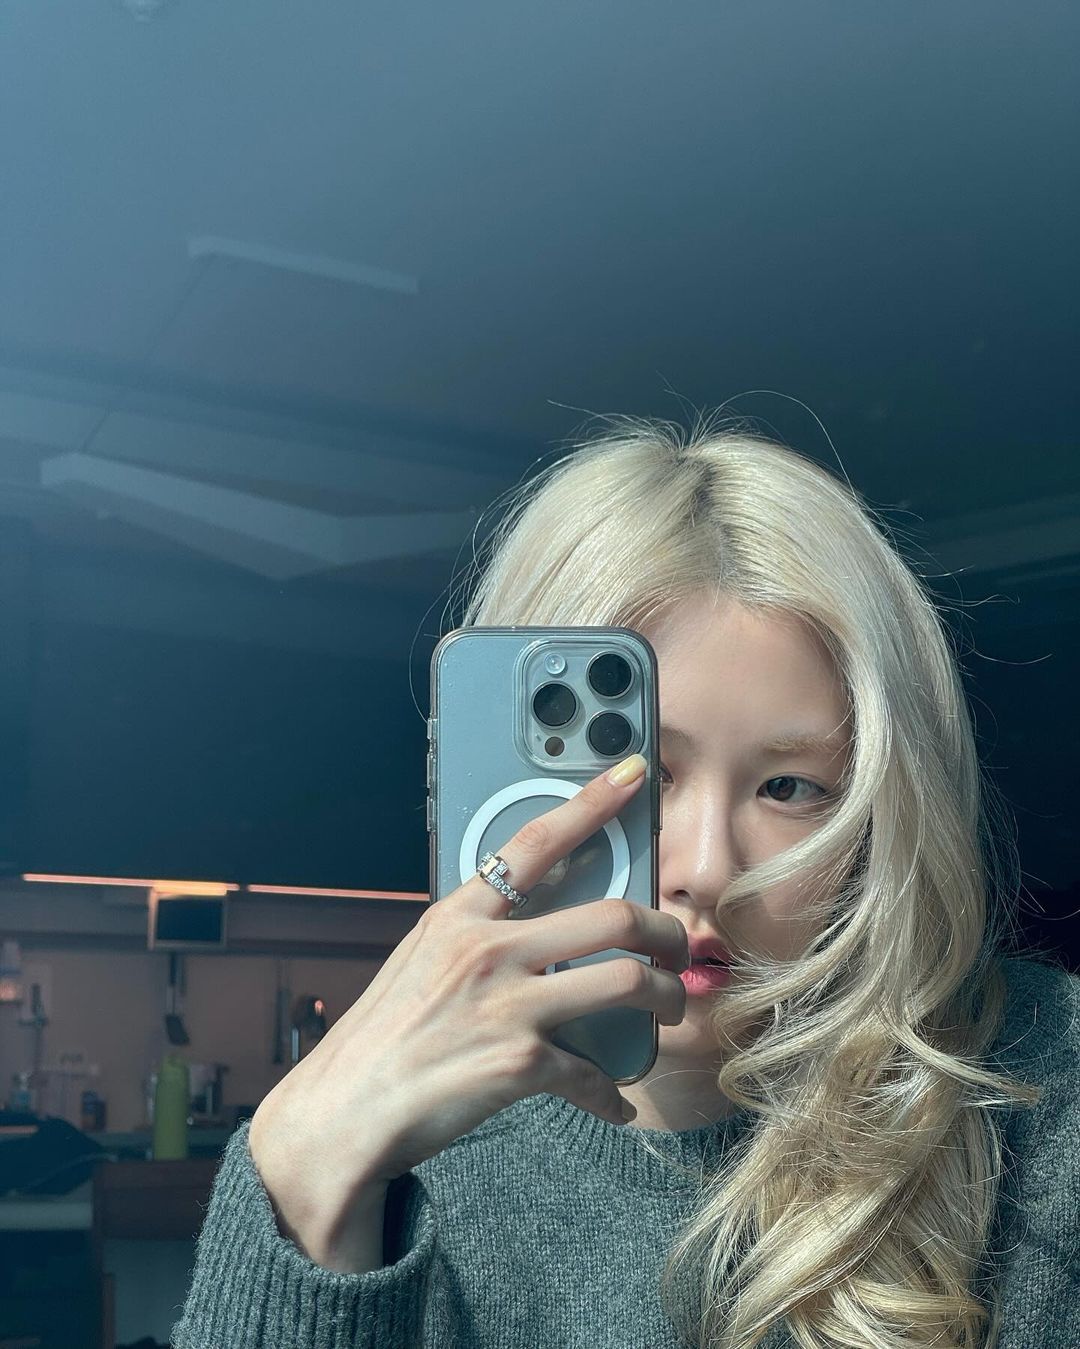 Rosé took a selfie with butter yellow nail color